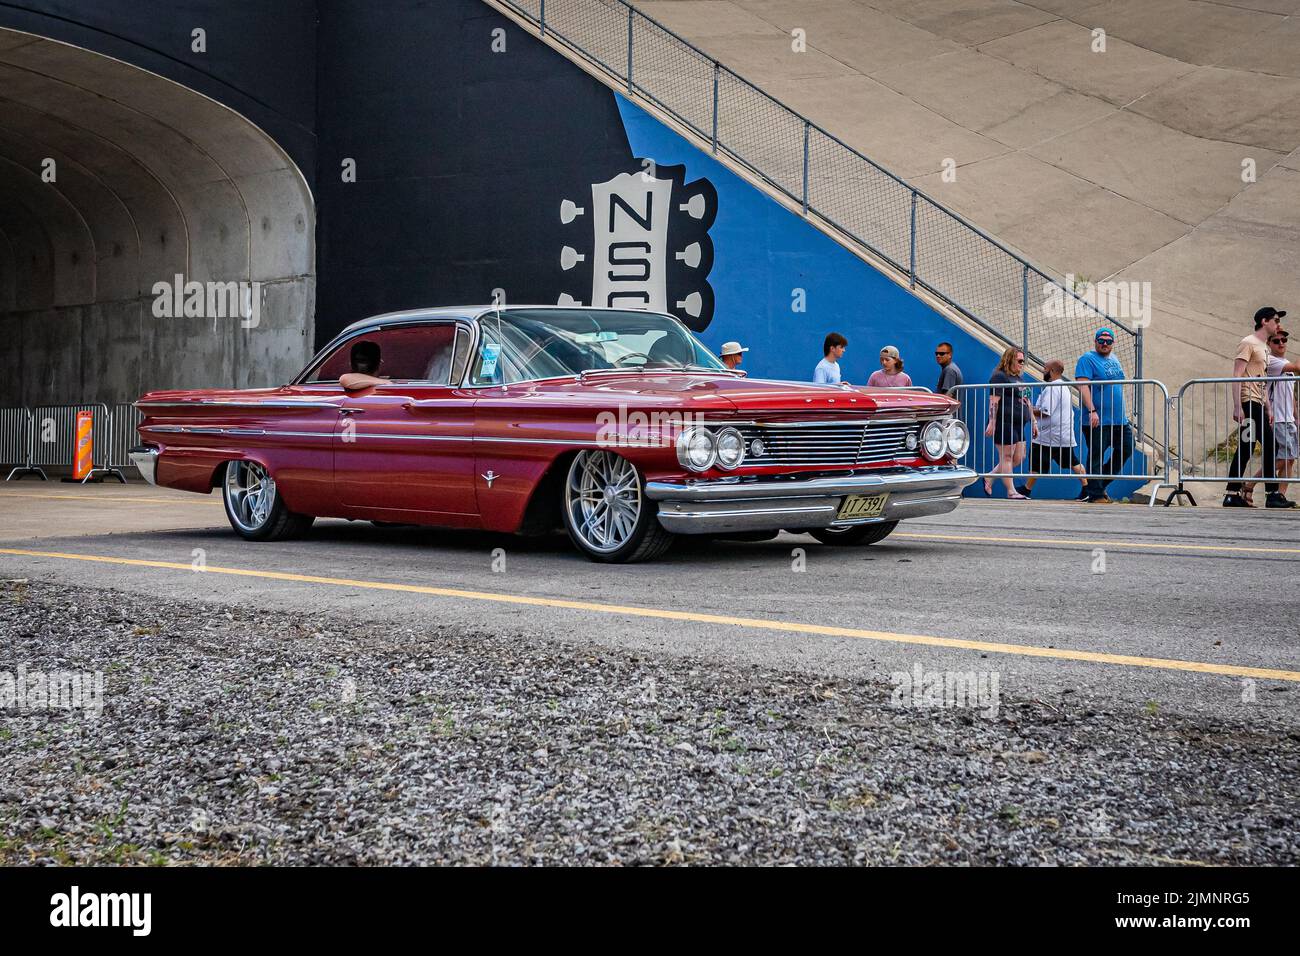 Lebanon, TN - May 14, 2022: Low perspective front view of a 1960 Pontiac Parisienne Hardtop Coupe driving on a road leaving a local car show. Stock Photo